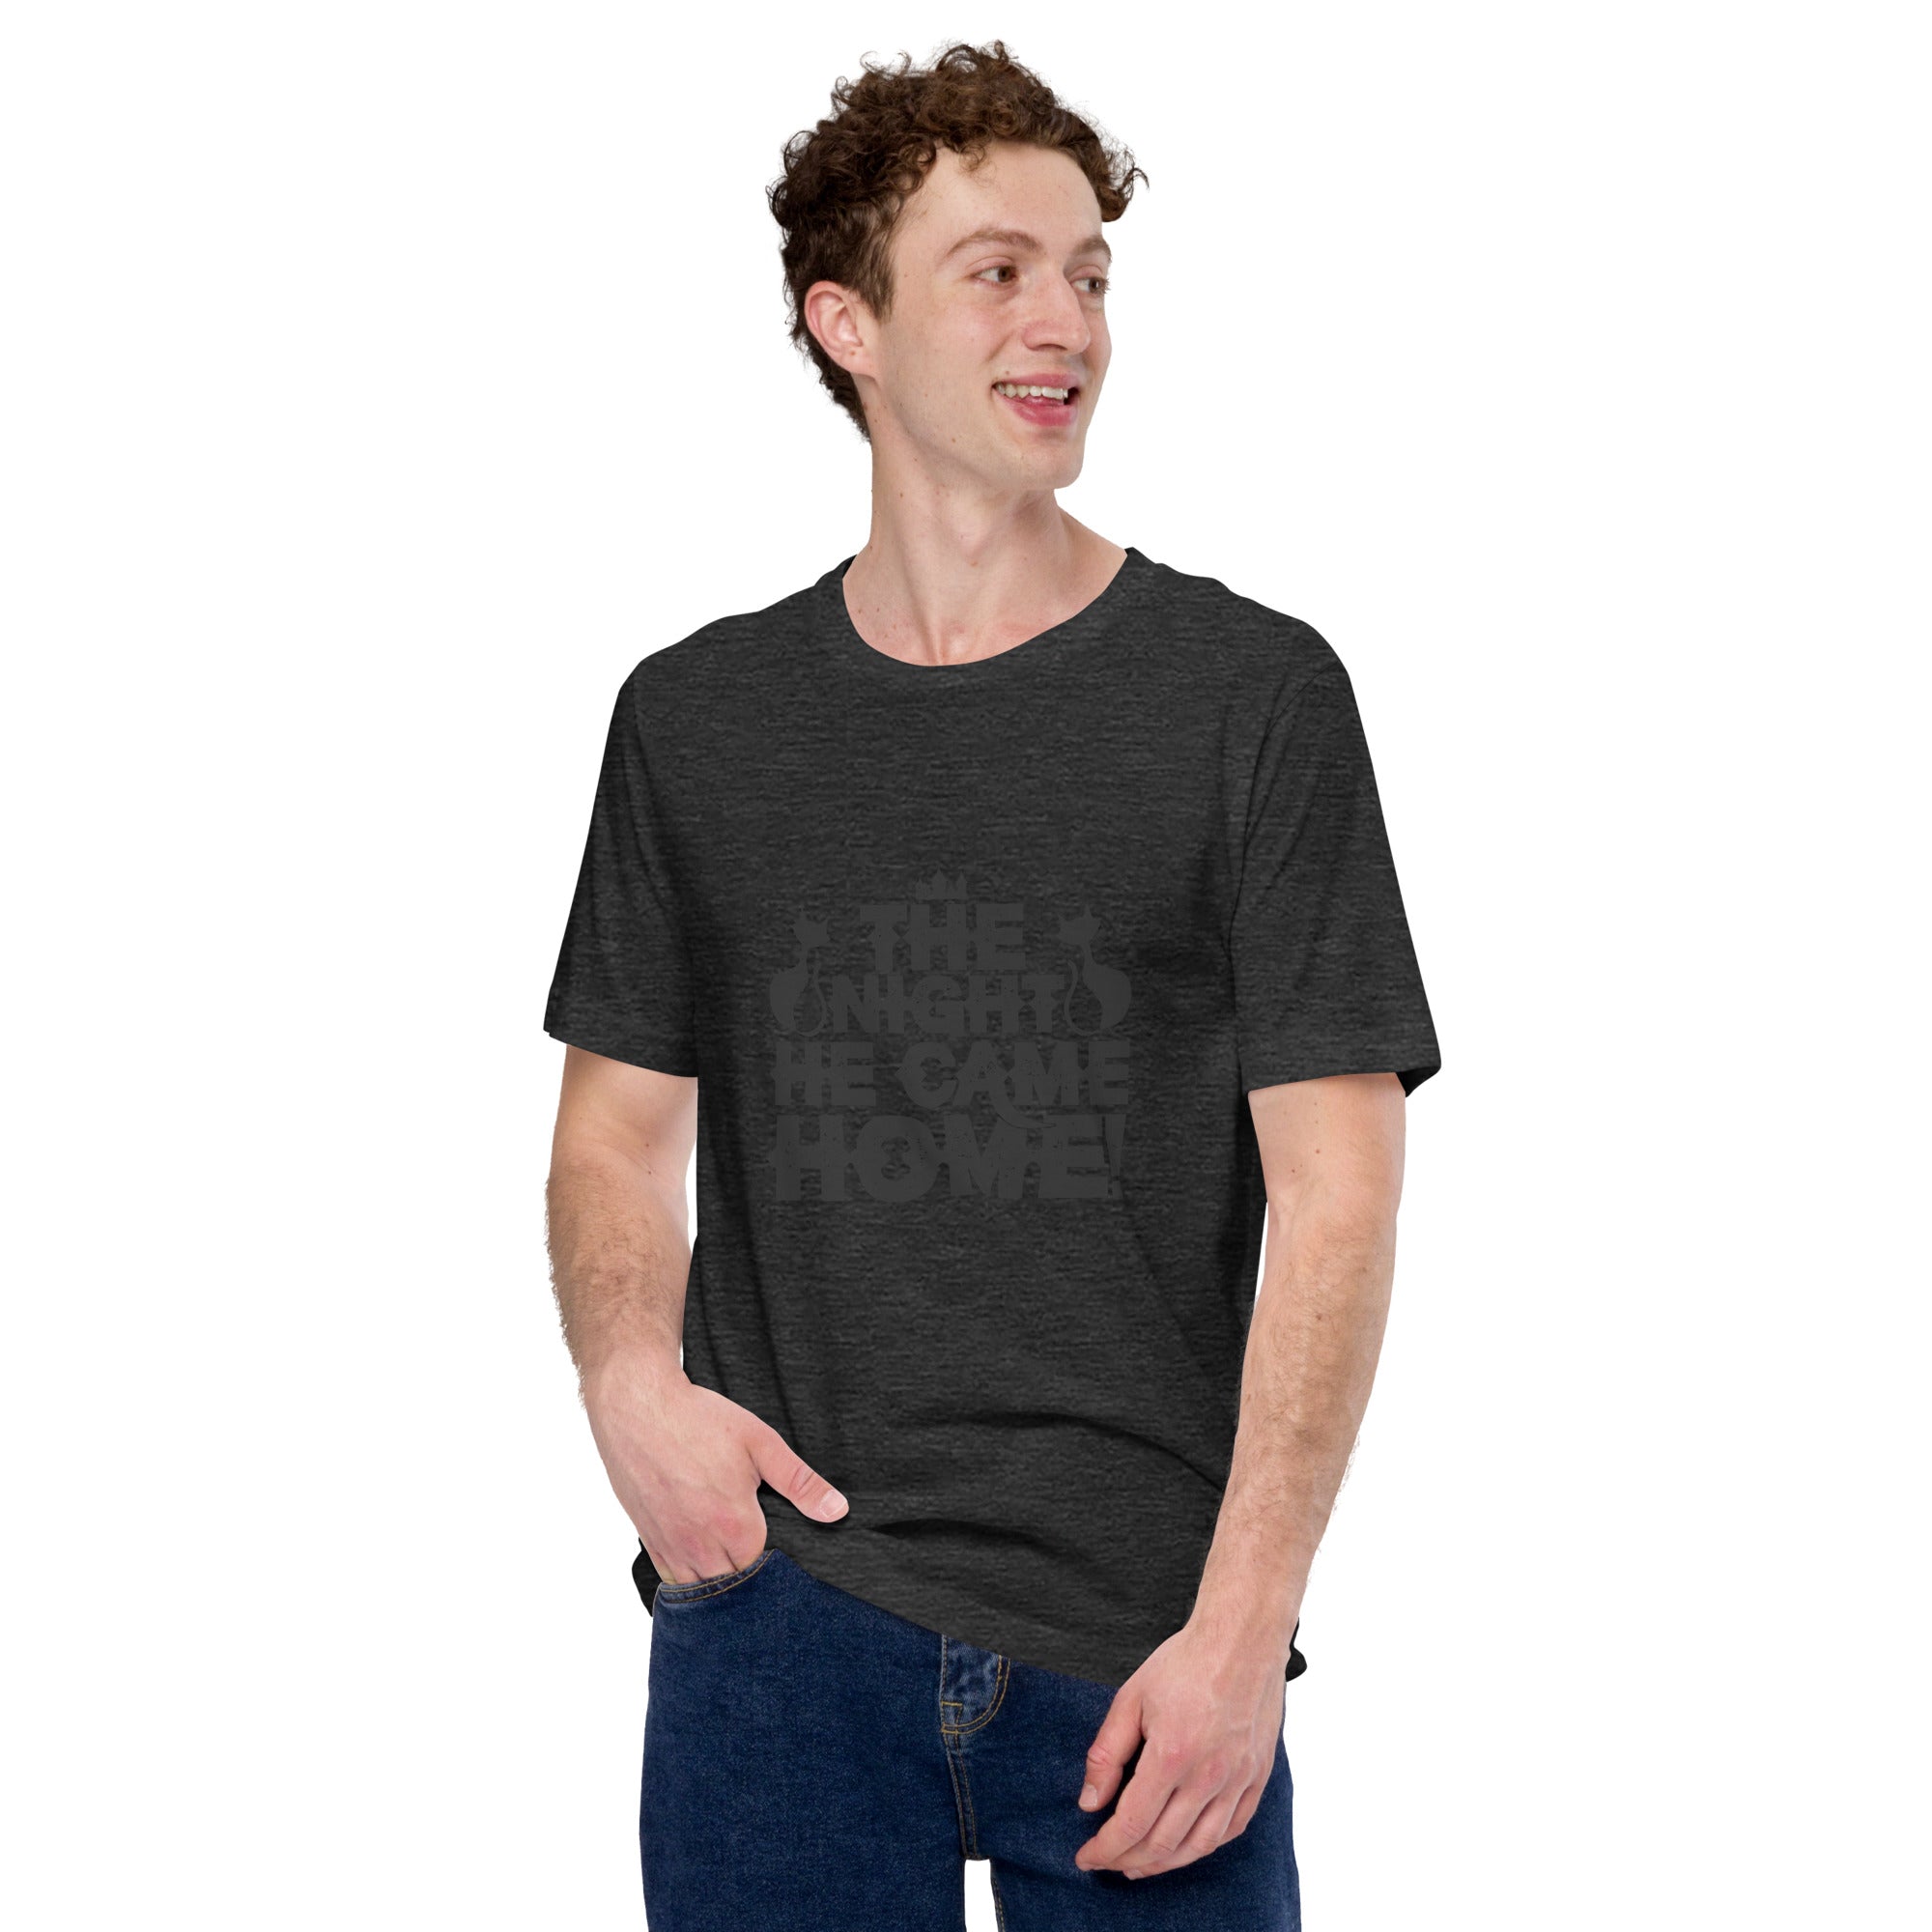 The Night He Came Home Unisex t-shirt